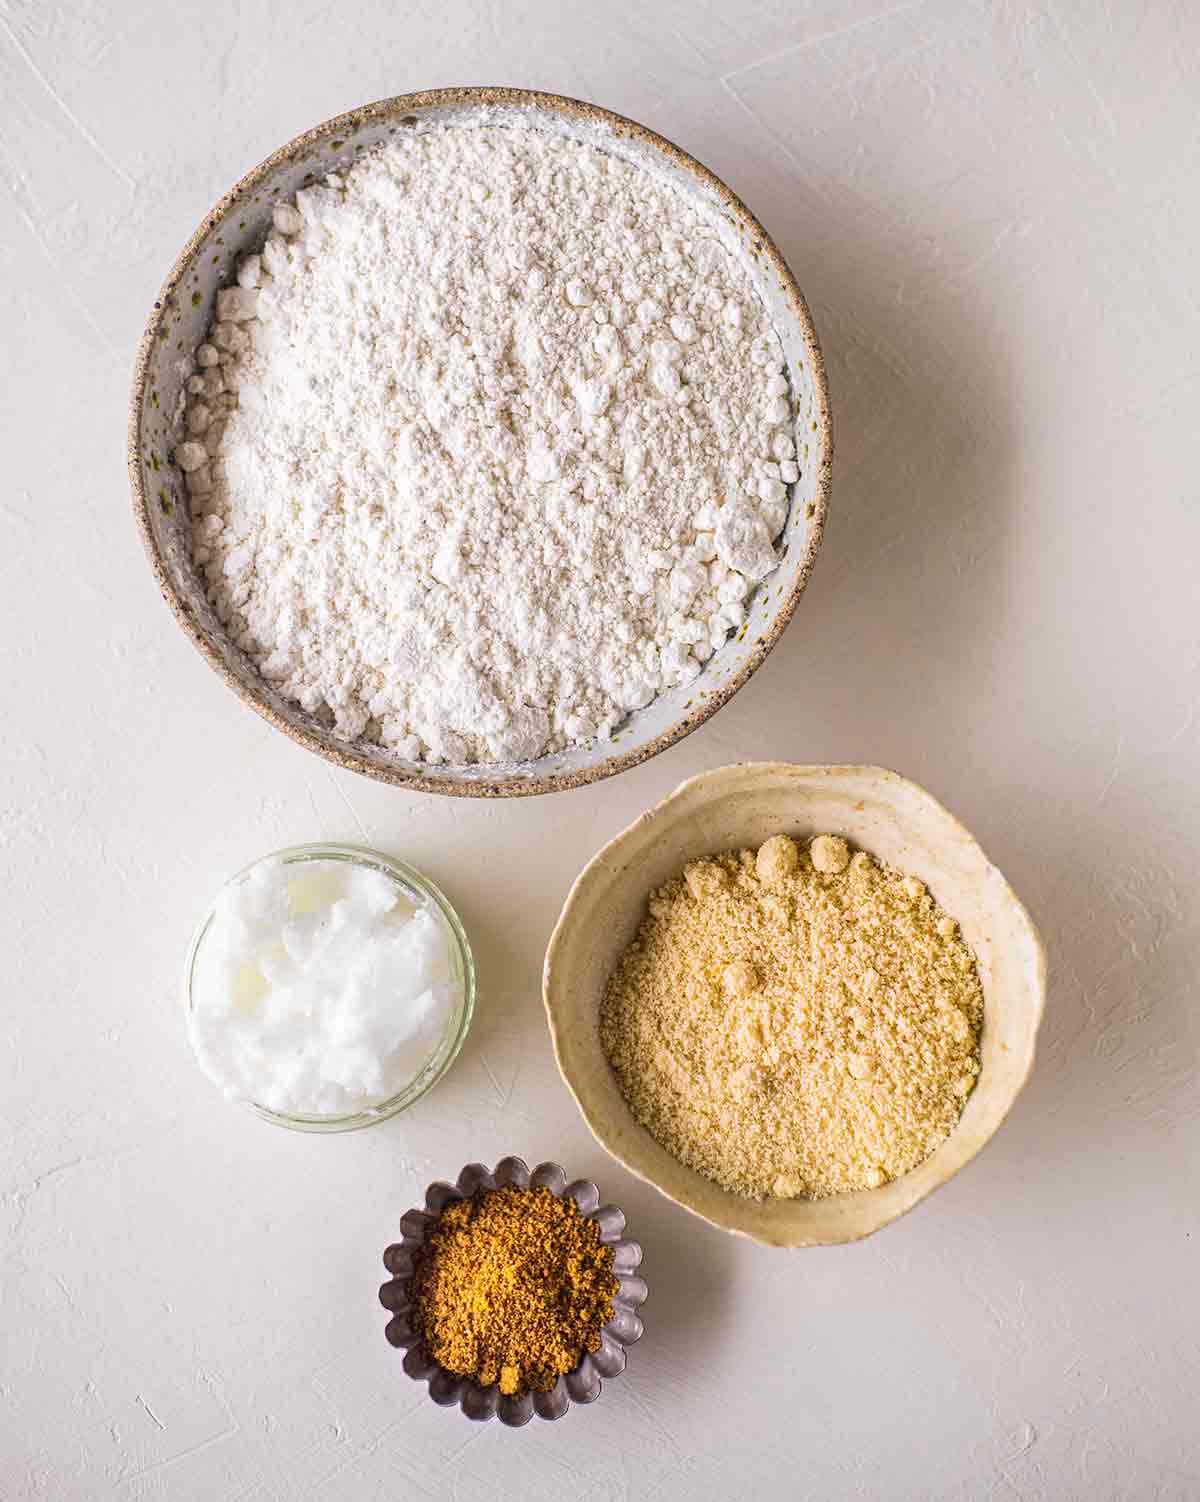 Flatlay of ingredients for the crust of the baked vegan cheescake.